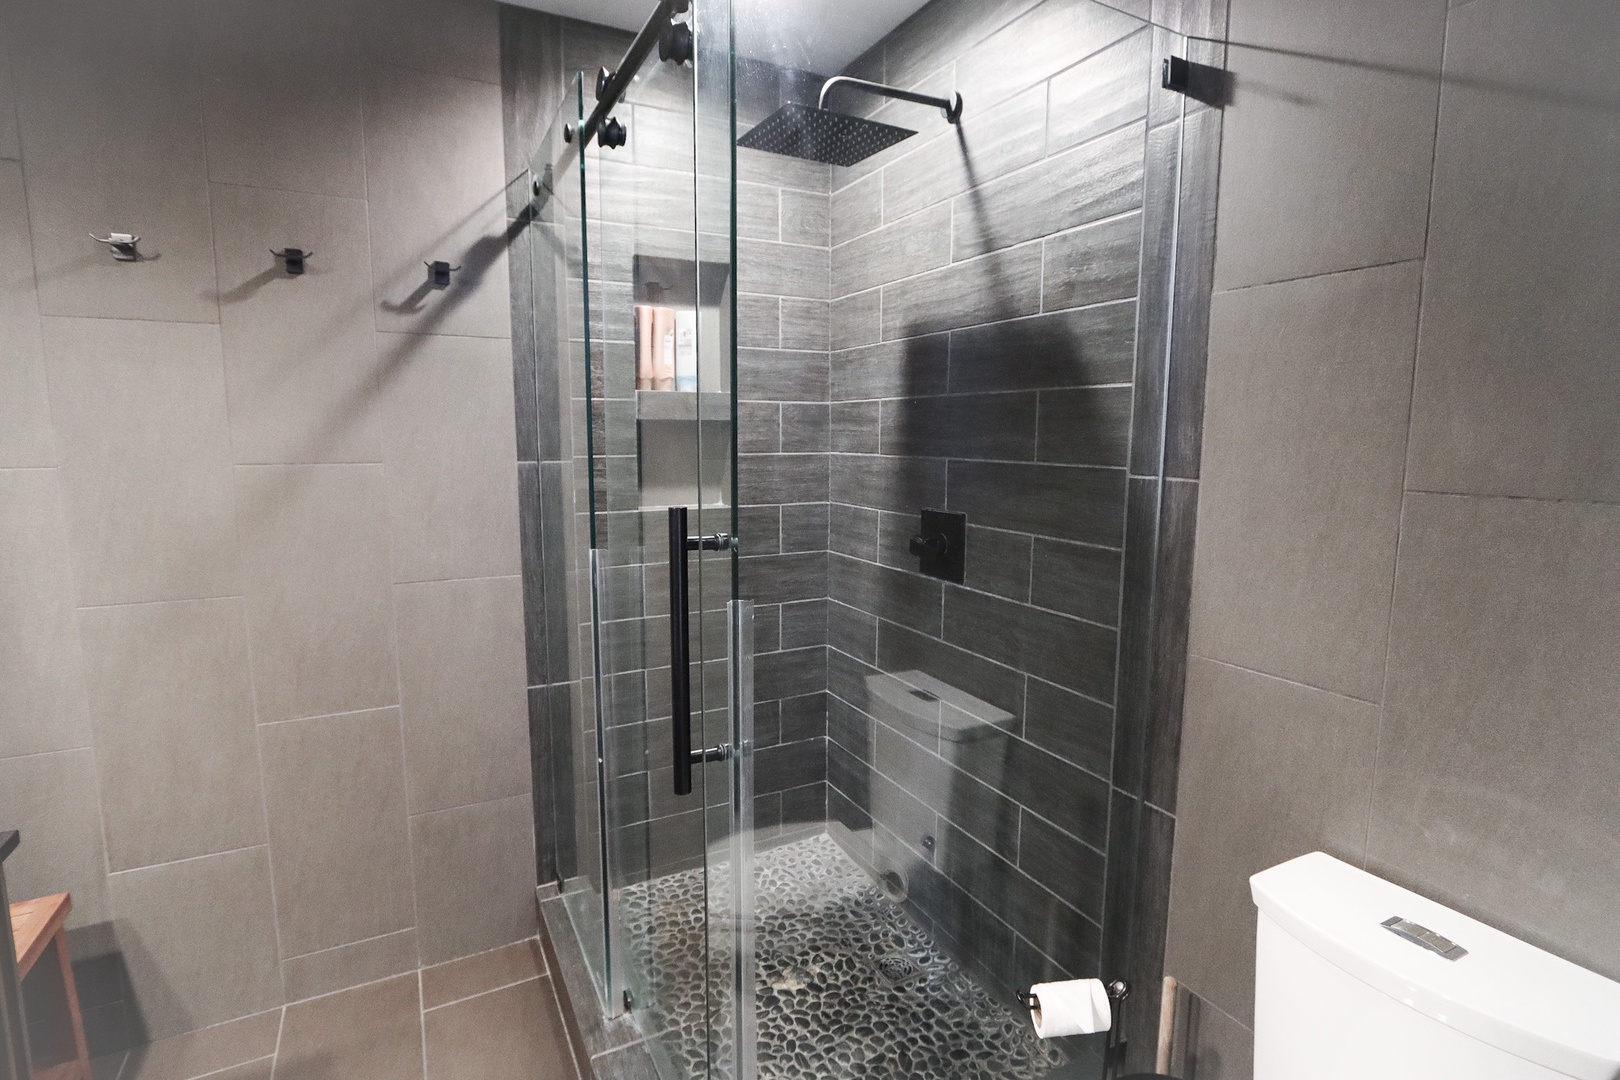 Ensuite bathroom with stand-up shower